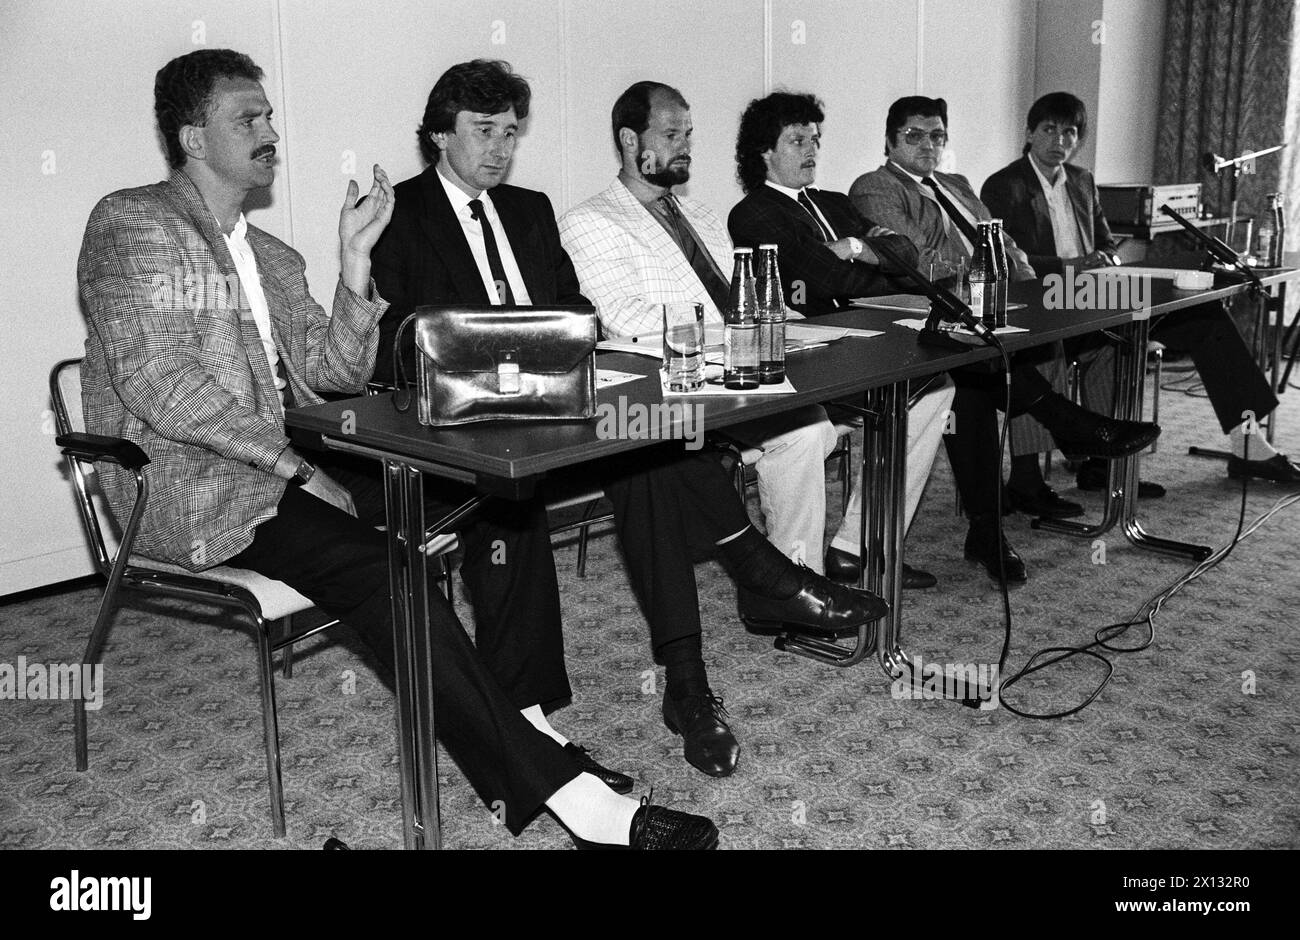 The photo was taken on May 29th 1988 on the occasion of the foundational meeting of the Union's section 'Football' and shows (f.l.t.r.) football player Herbert Prohaska, Rudolf Novotny (Executive Director of the Union), Thomas Pfeiler (Captain of the football club Spittal), football player Heribert Weber, Walter Bacher (Central Secretary of the Union's Section for Art, Media and Freelancers) and Andi Pichler (Captain of the football club St. Poelten). - 19880529 PD0006 - Rechteinfo: Rights Managed (RM) Stock Photo